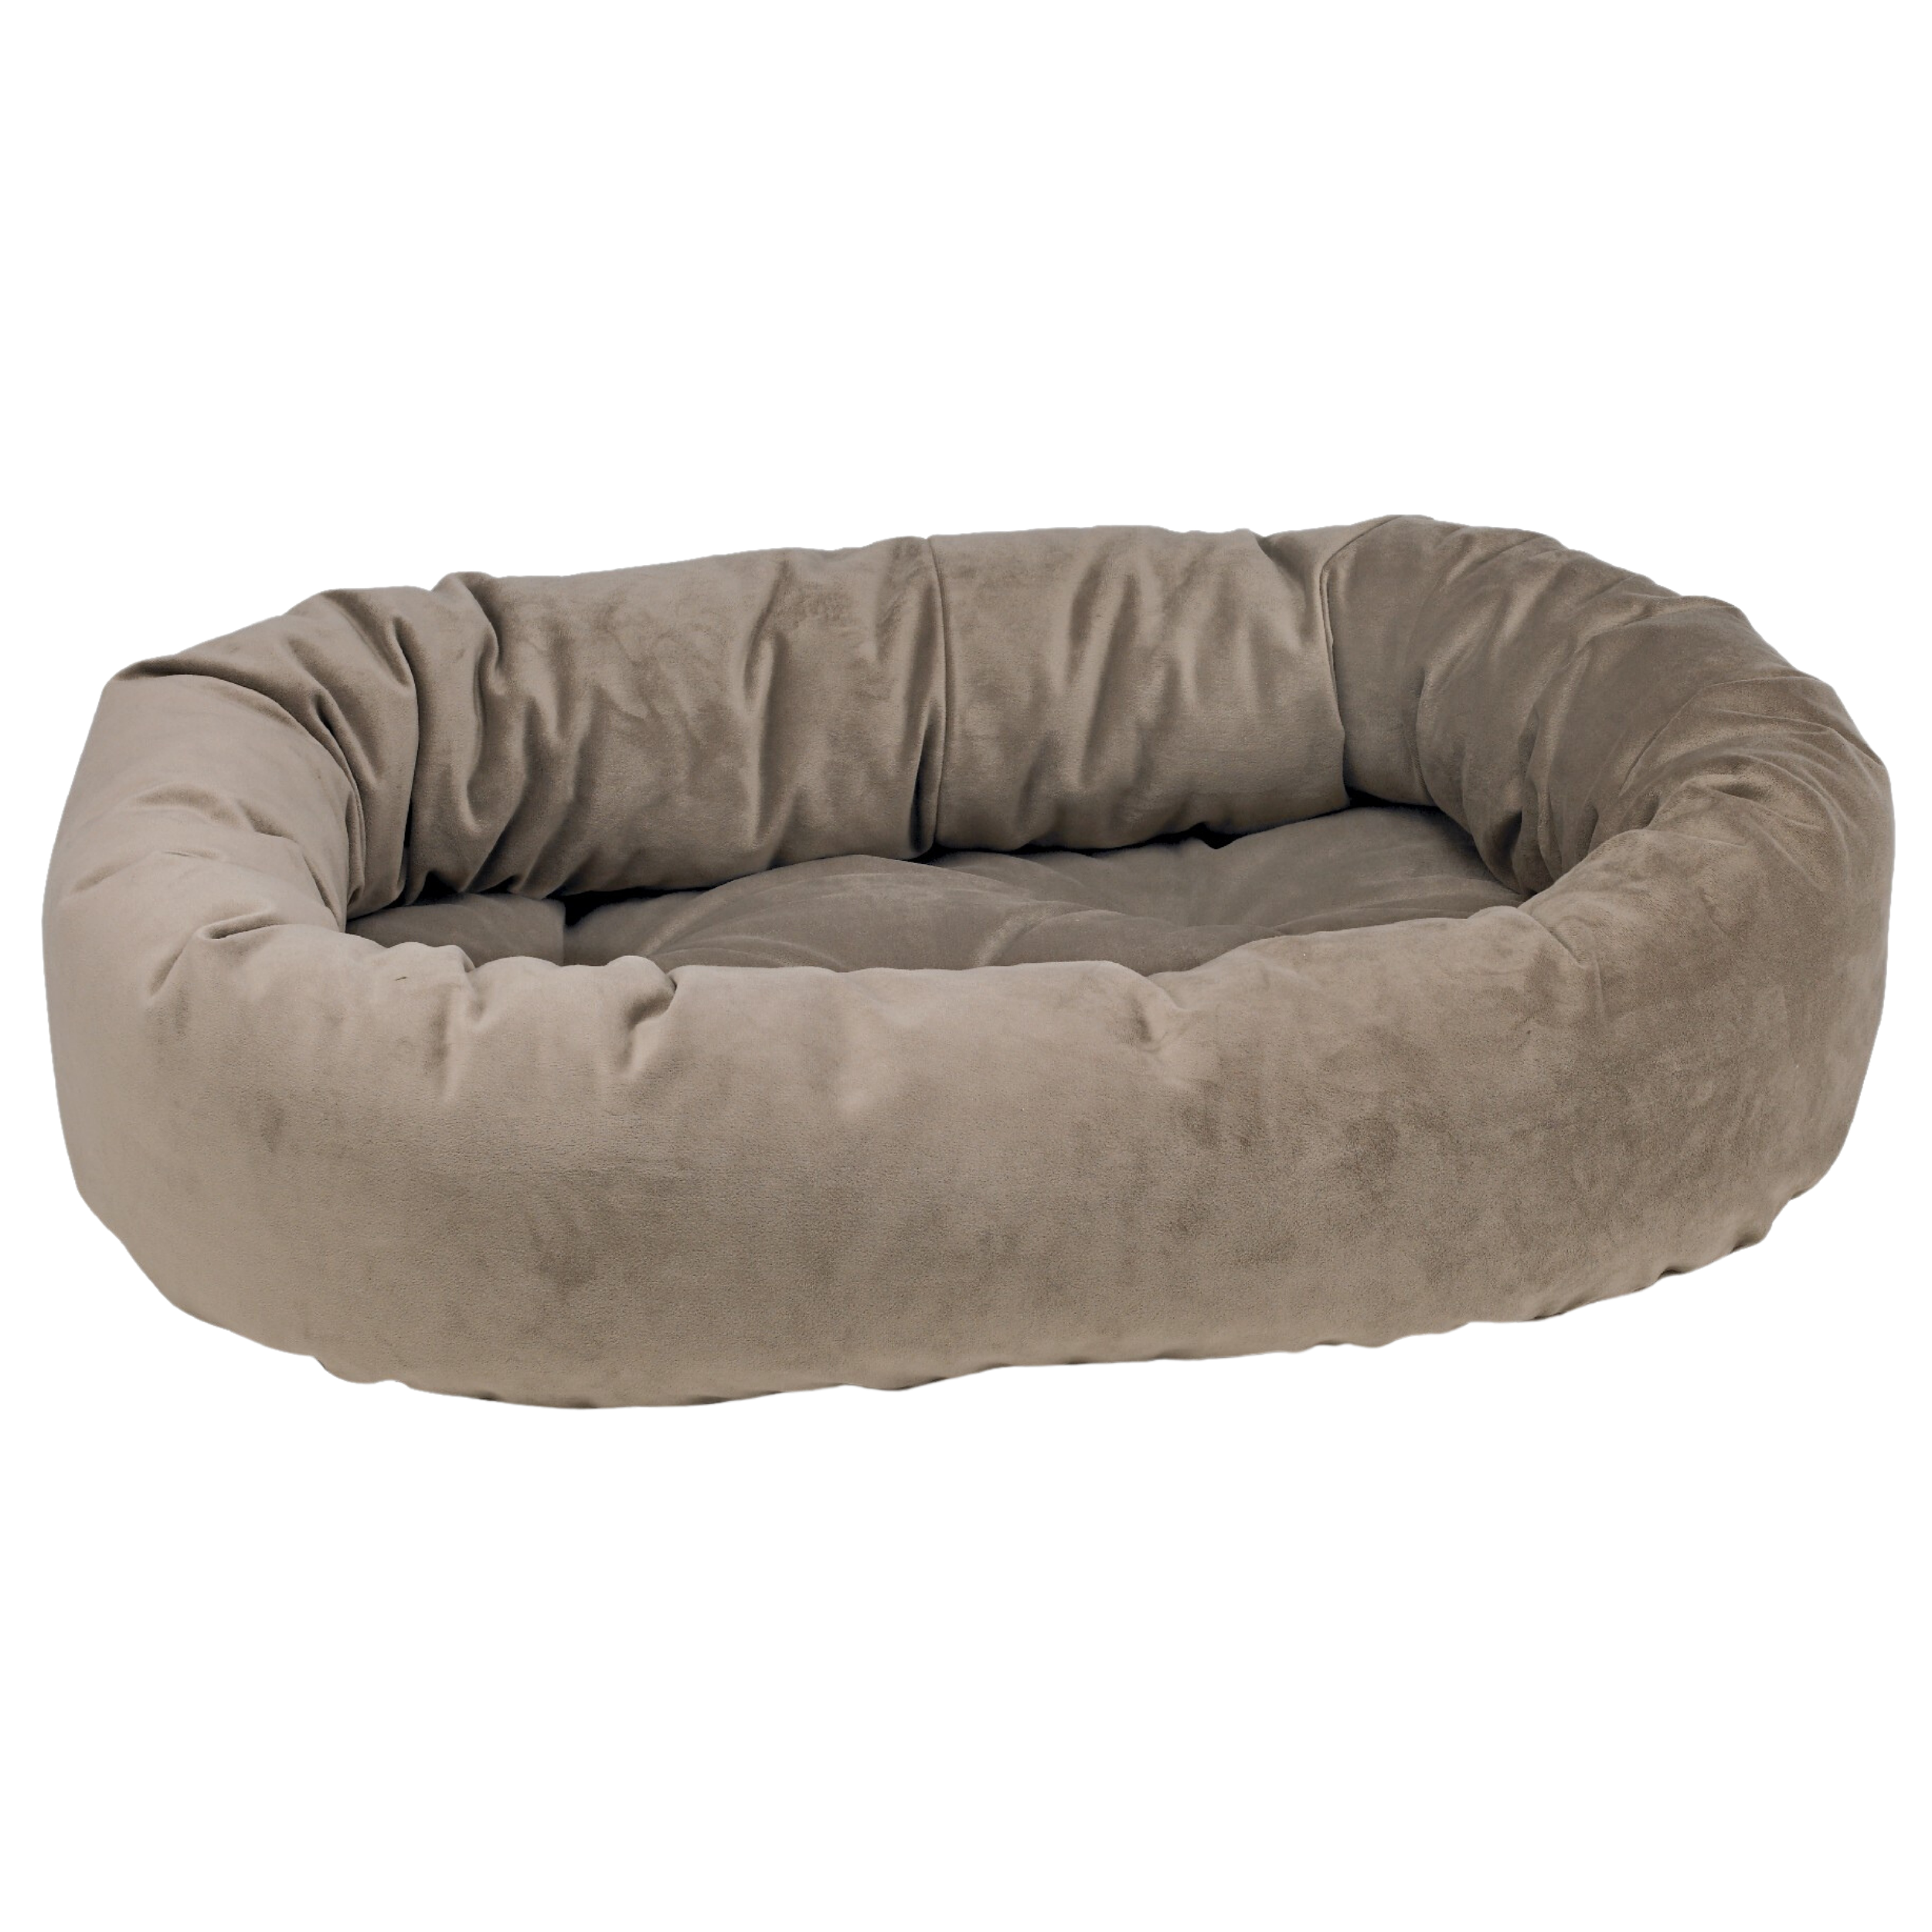 PEBBLE-DONUT-DOG-BED